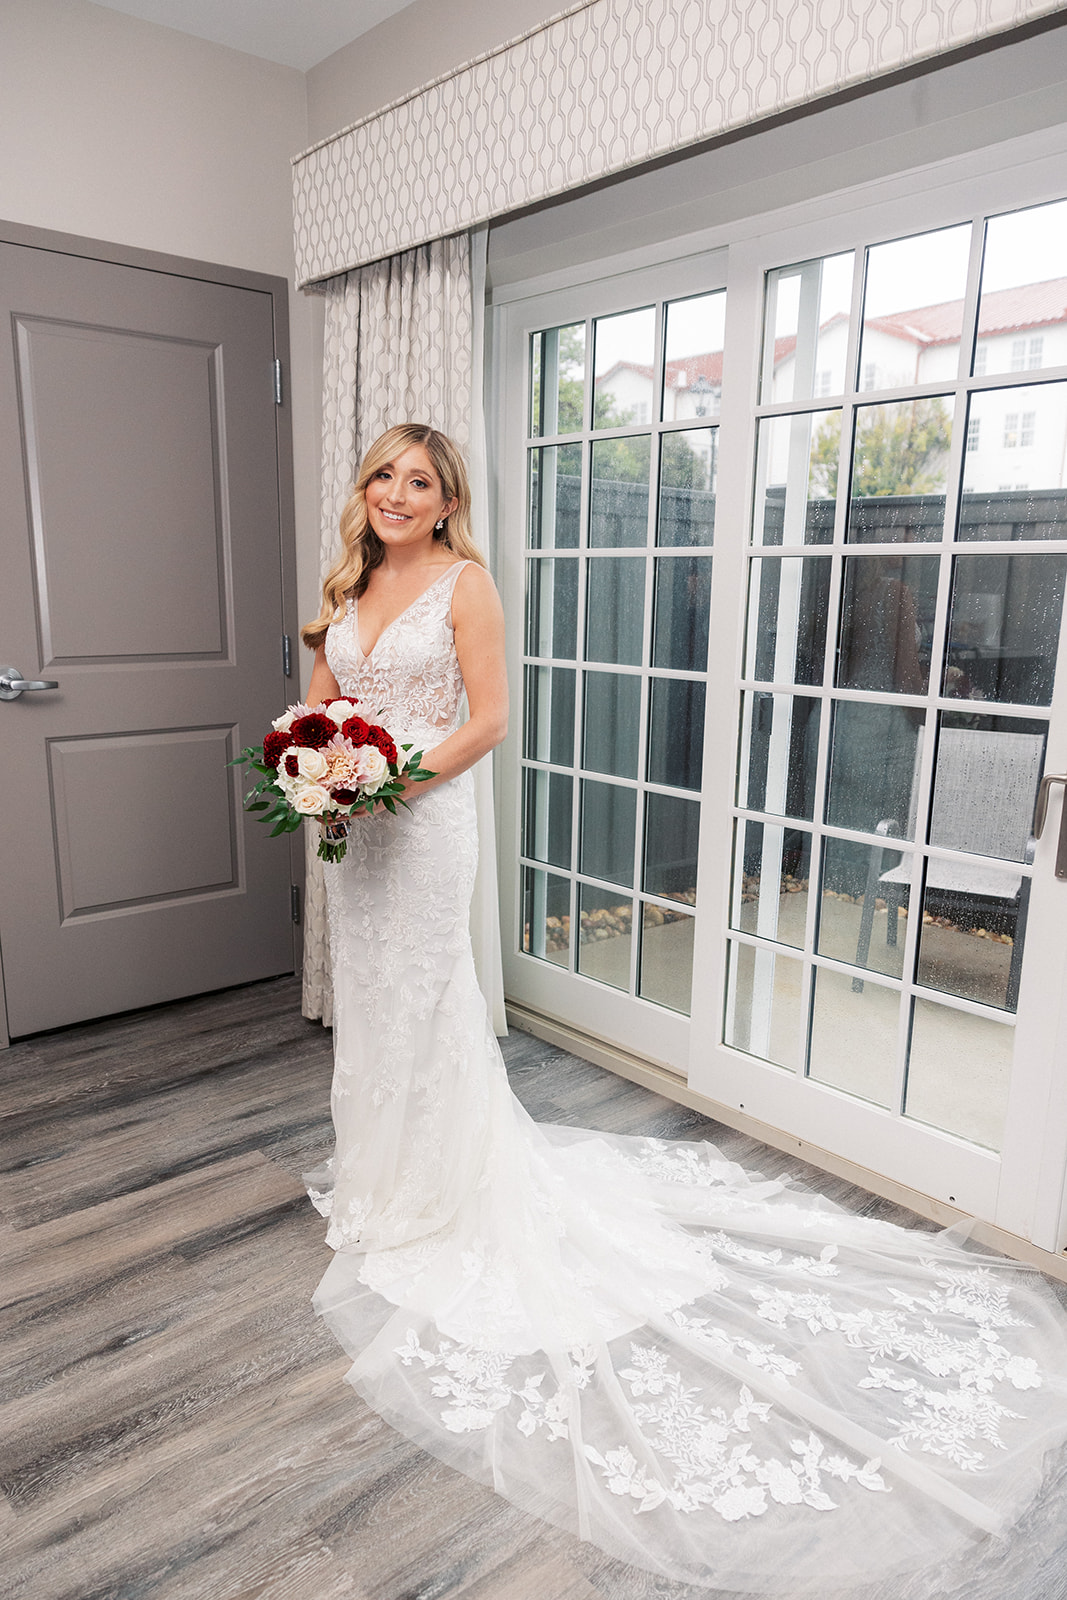 A bride smiles while standing in a getting ready room by a porch